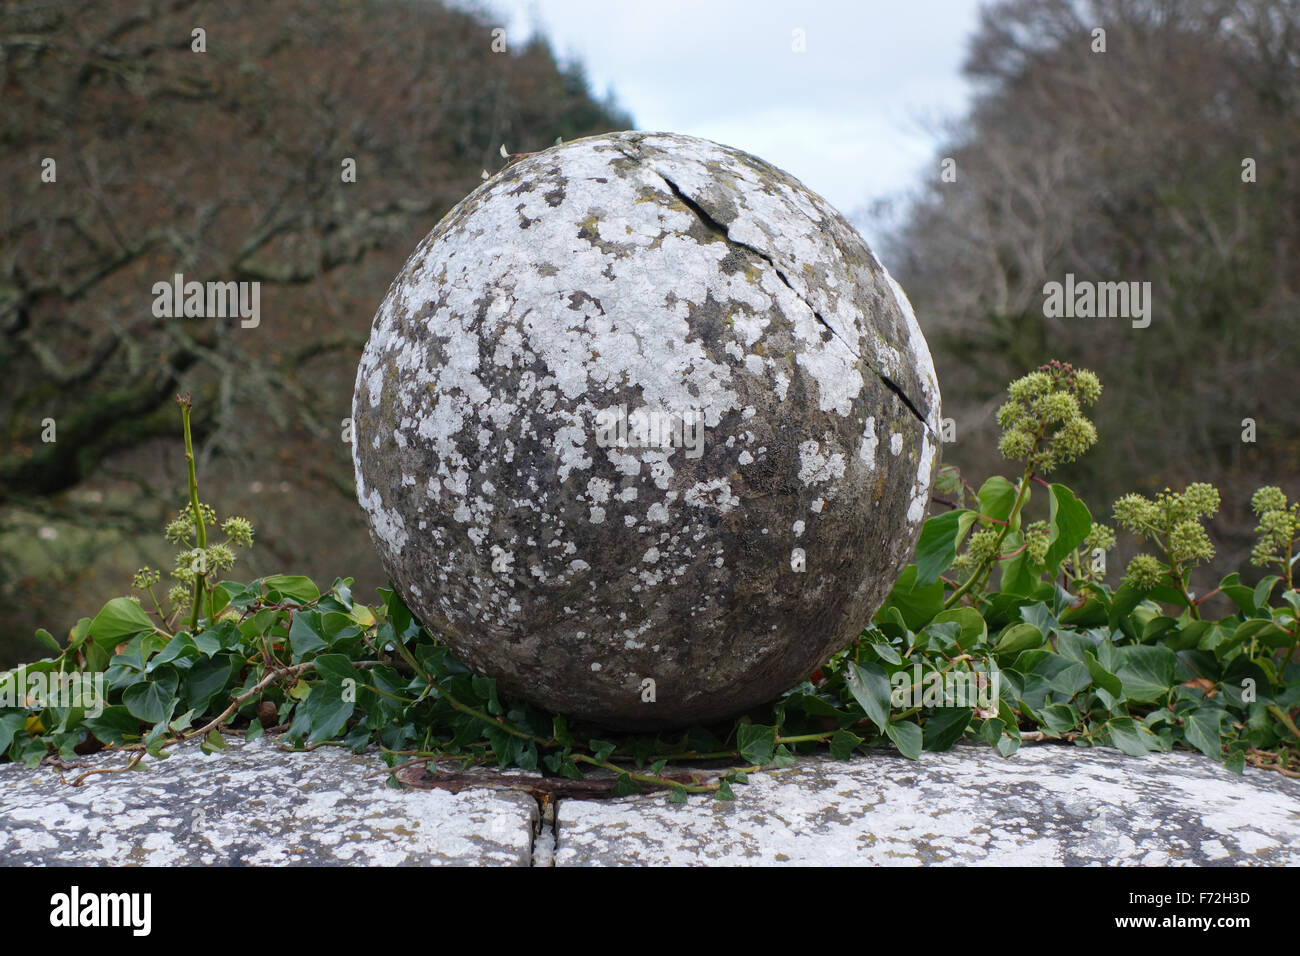 Ornamental orb with lichen and ivy on Blackpool Bridge, which crosses the Eastern Cleddau River at Blackpool Mill, near Canaston Stock Photo